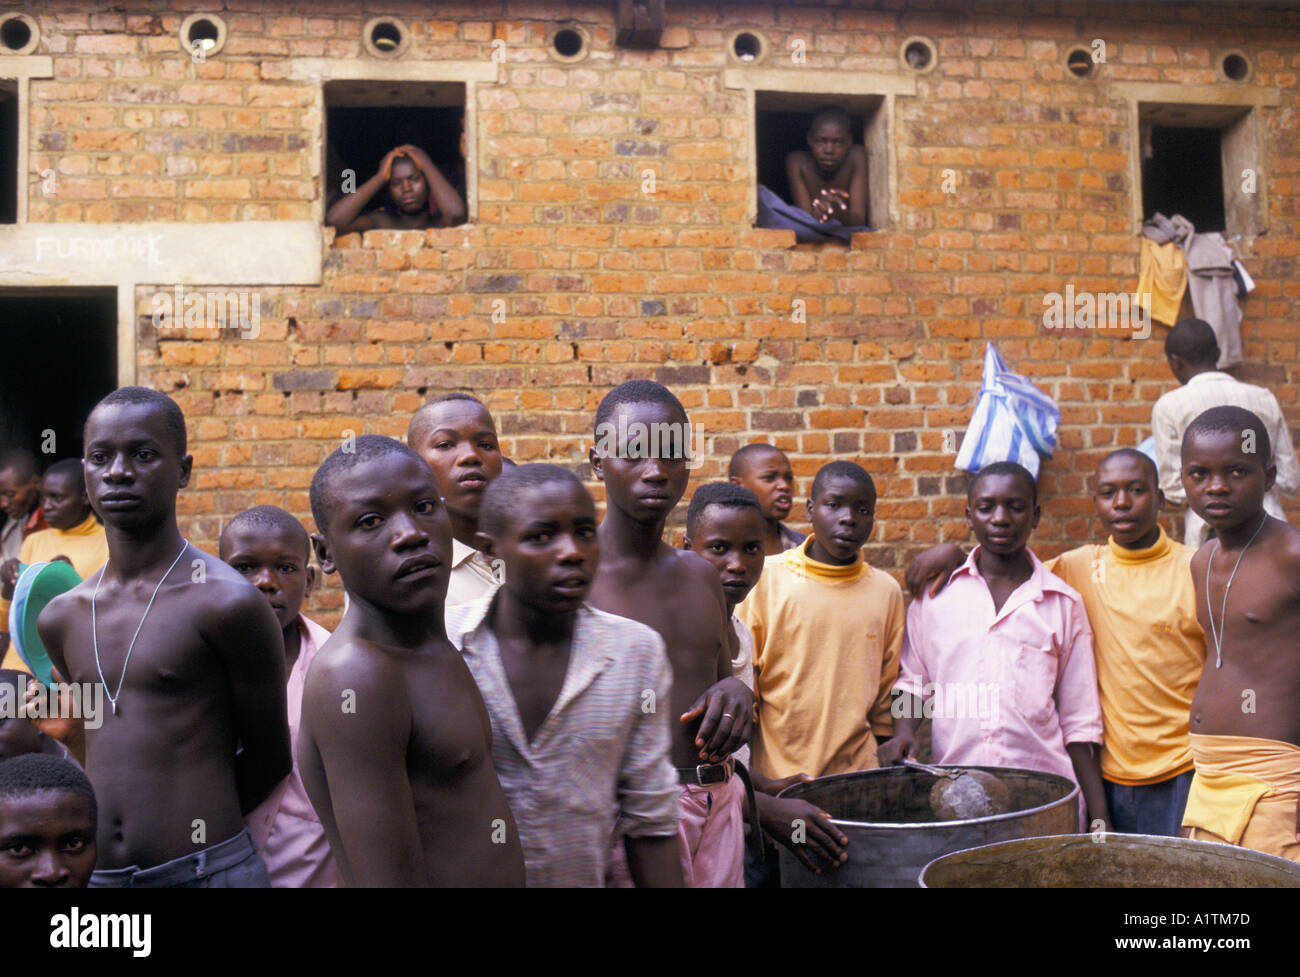 RETURN TO RWANDA MARCH 1995 KIGALI PRISON CHILDREN S SECTION SOME ARE ACCUSED OF GENOCIDE Stock Photo